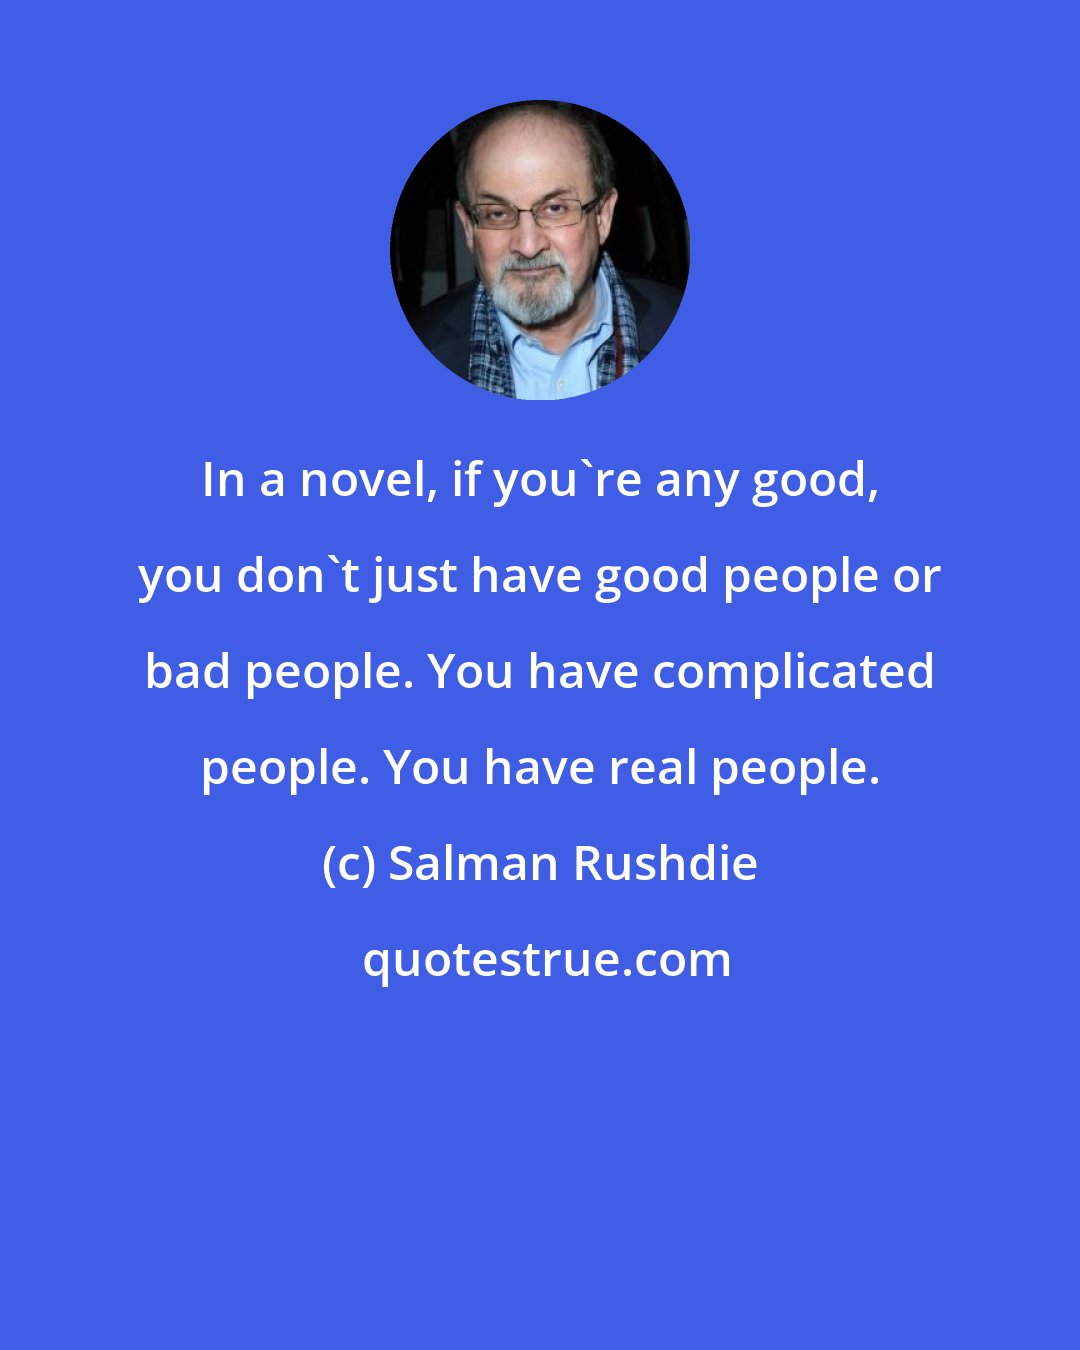 Salman Rushdie: In a novel, if you're any good, you don't just have good people or bad people. You have complicated people. You have real people.